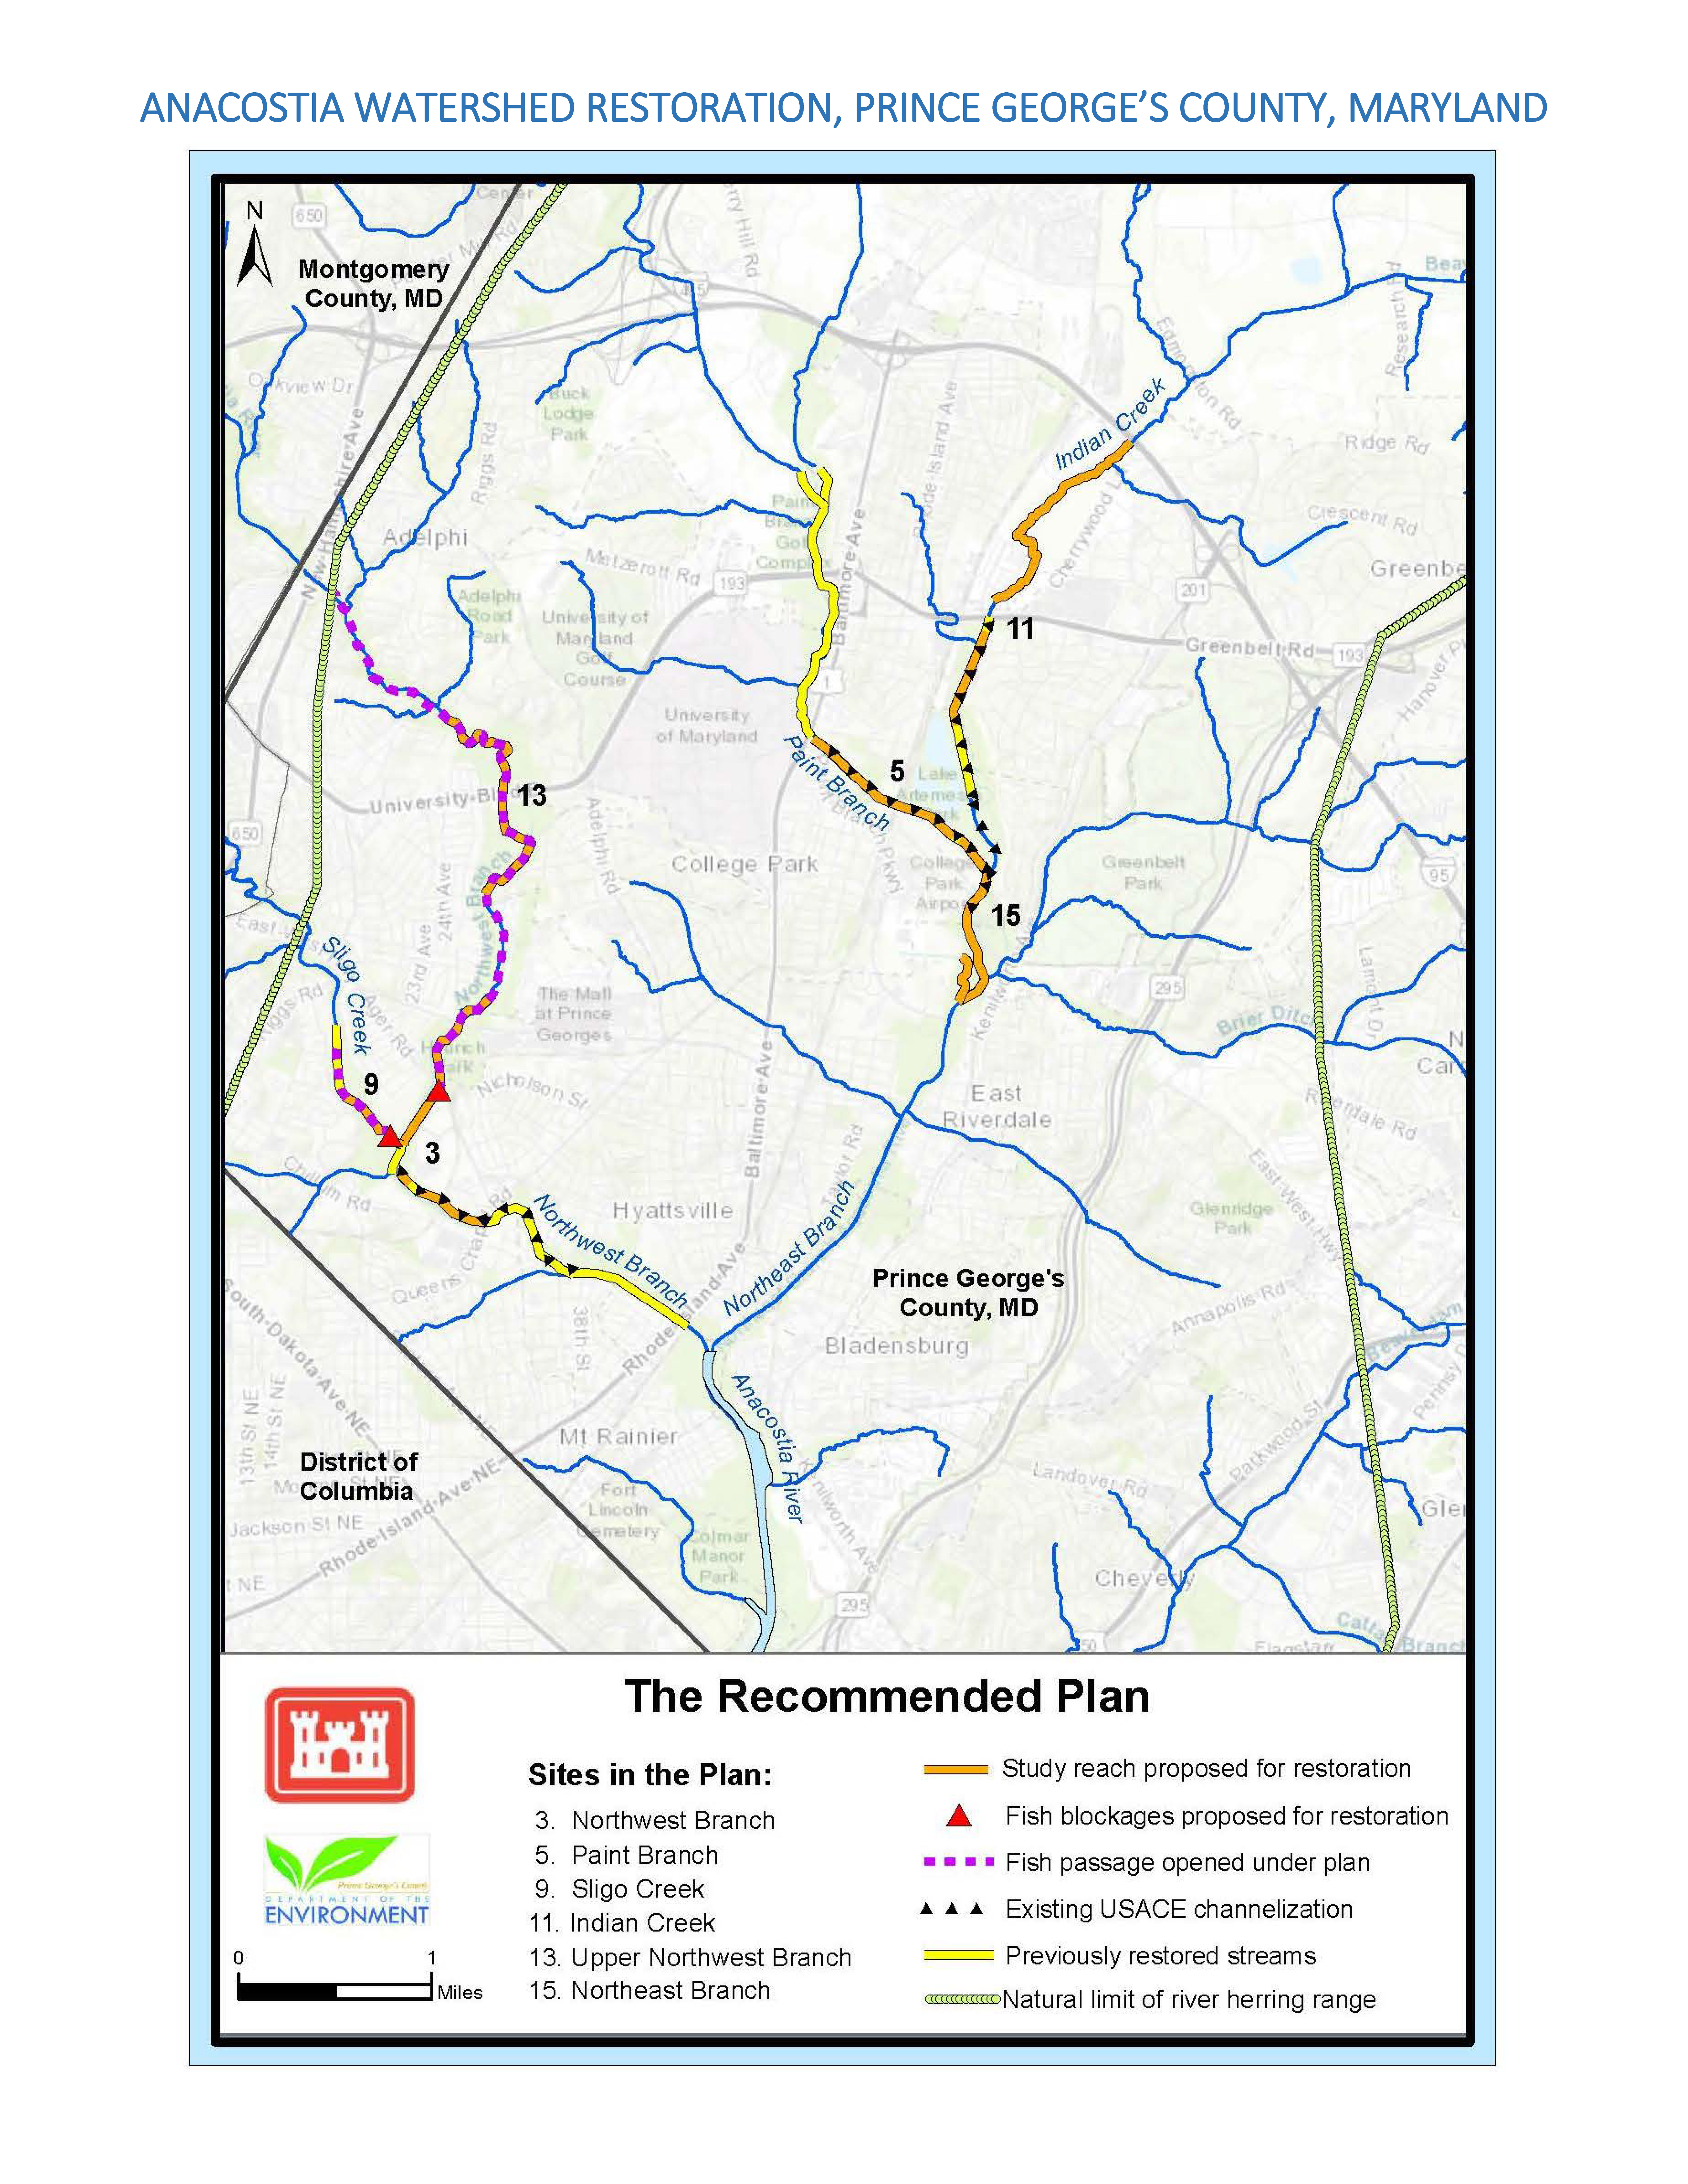 Project map showing the projects included in this Anacostia Watershed restoration project.